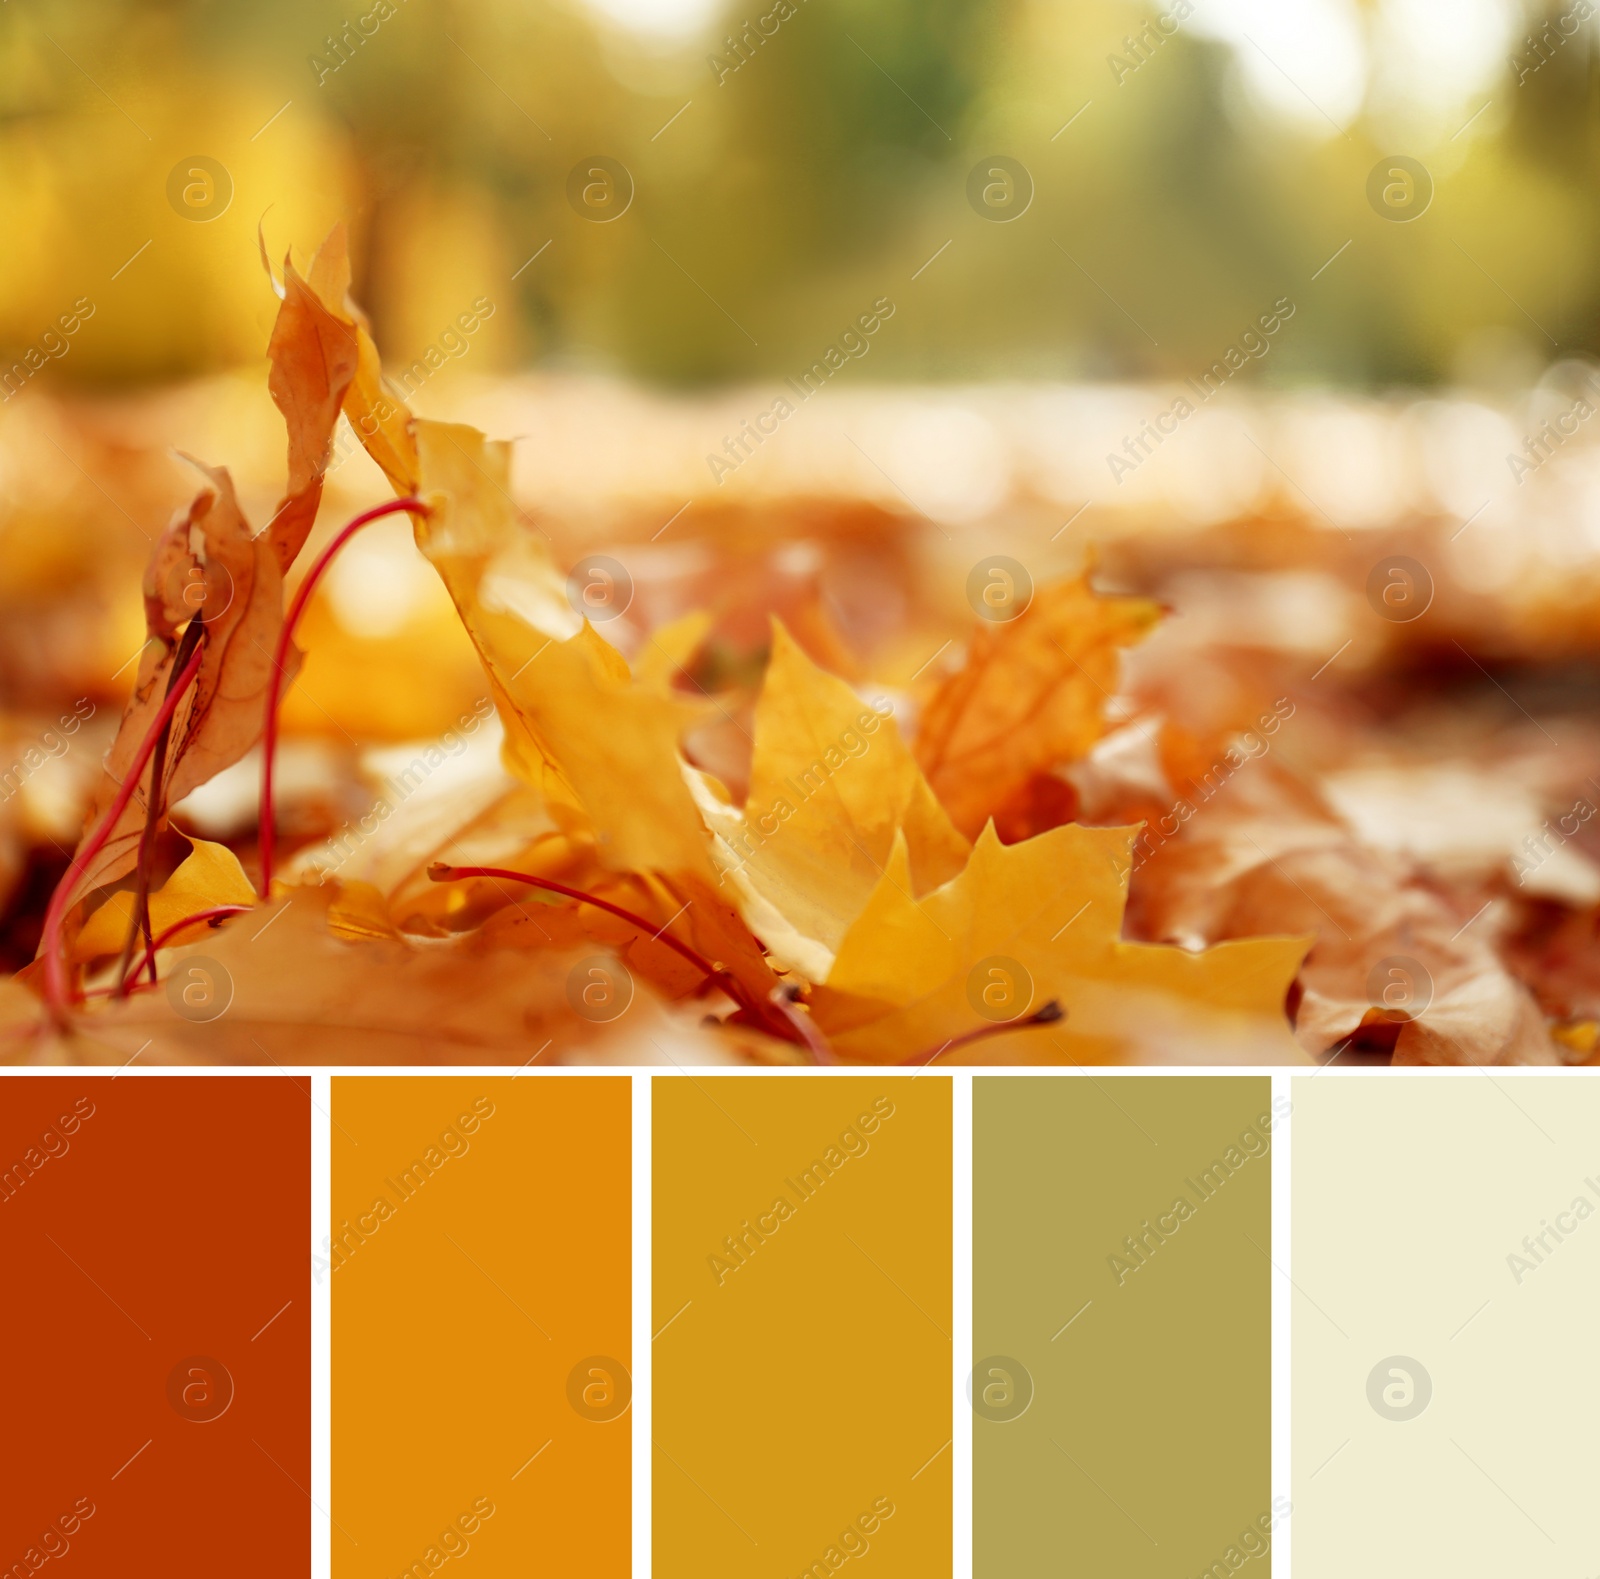 Image of Palette of autumn colors and yellow leaves on ground in park, closeup